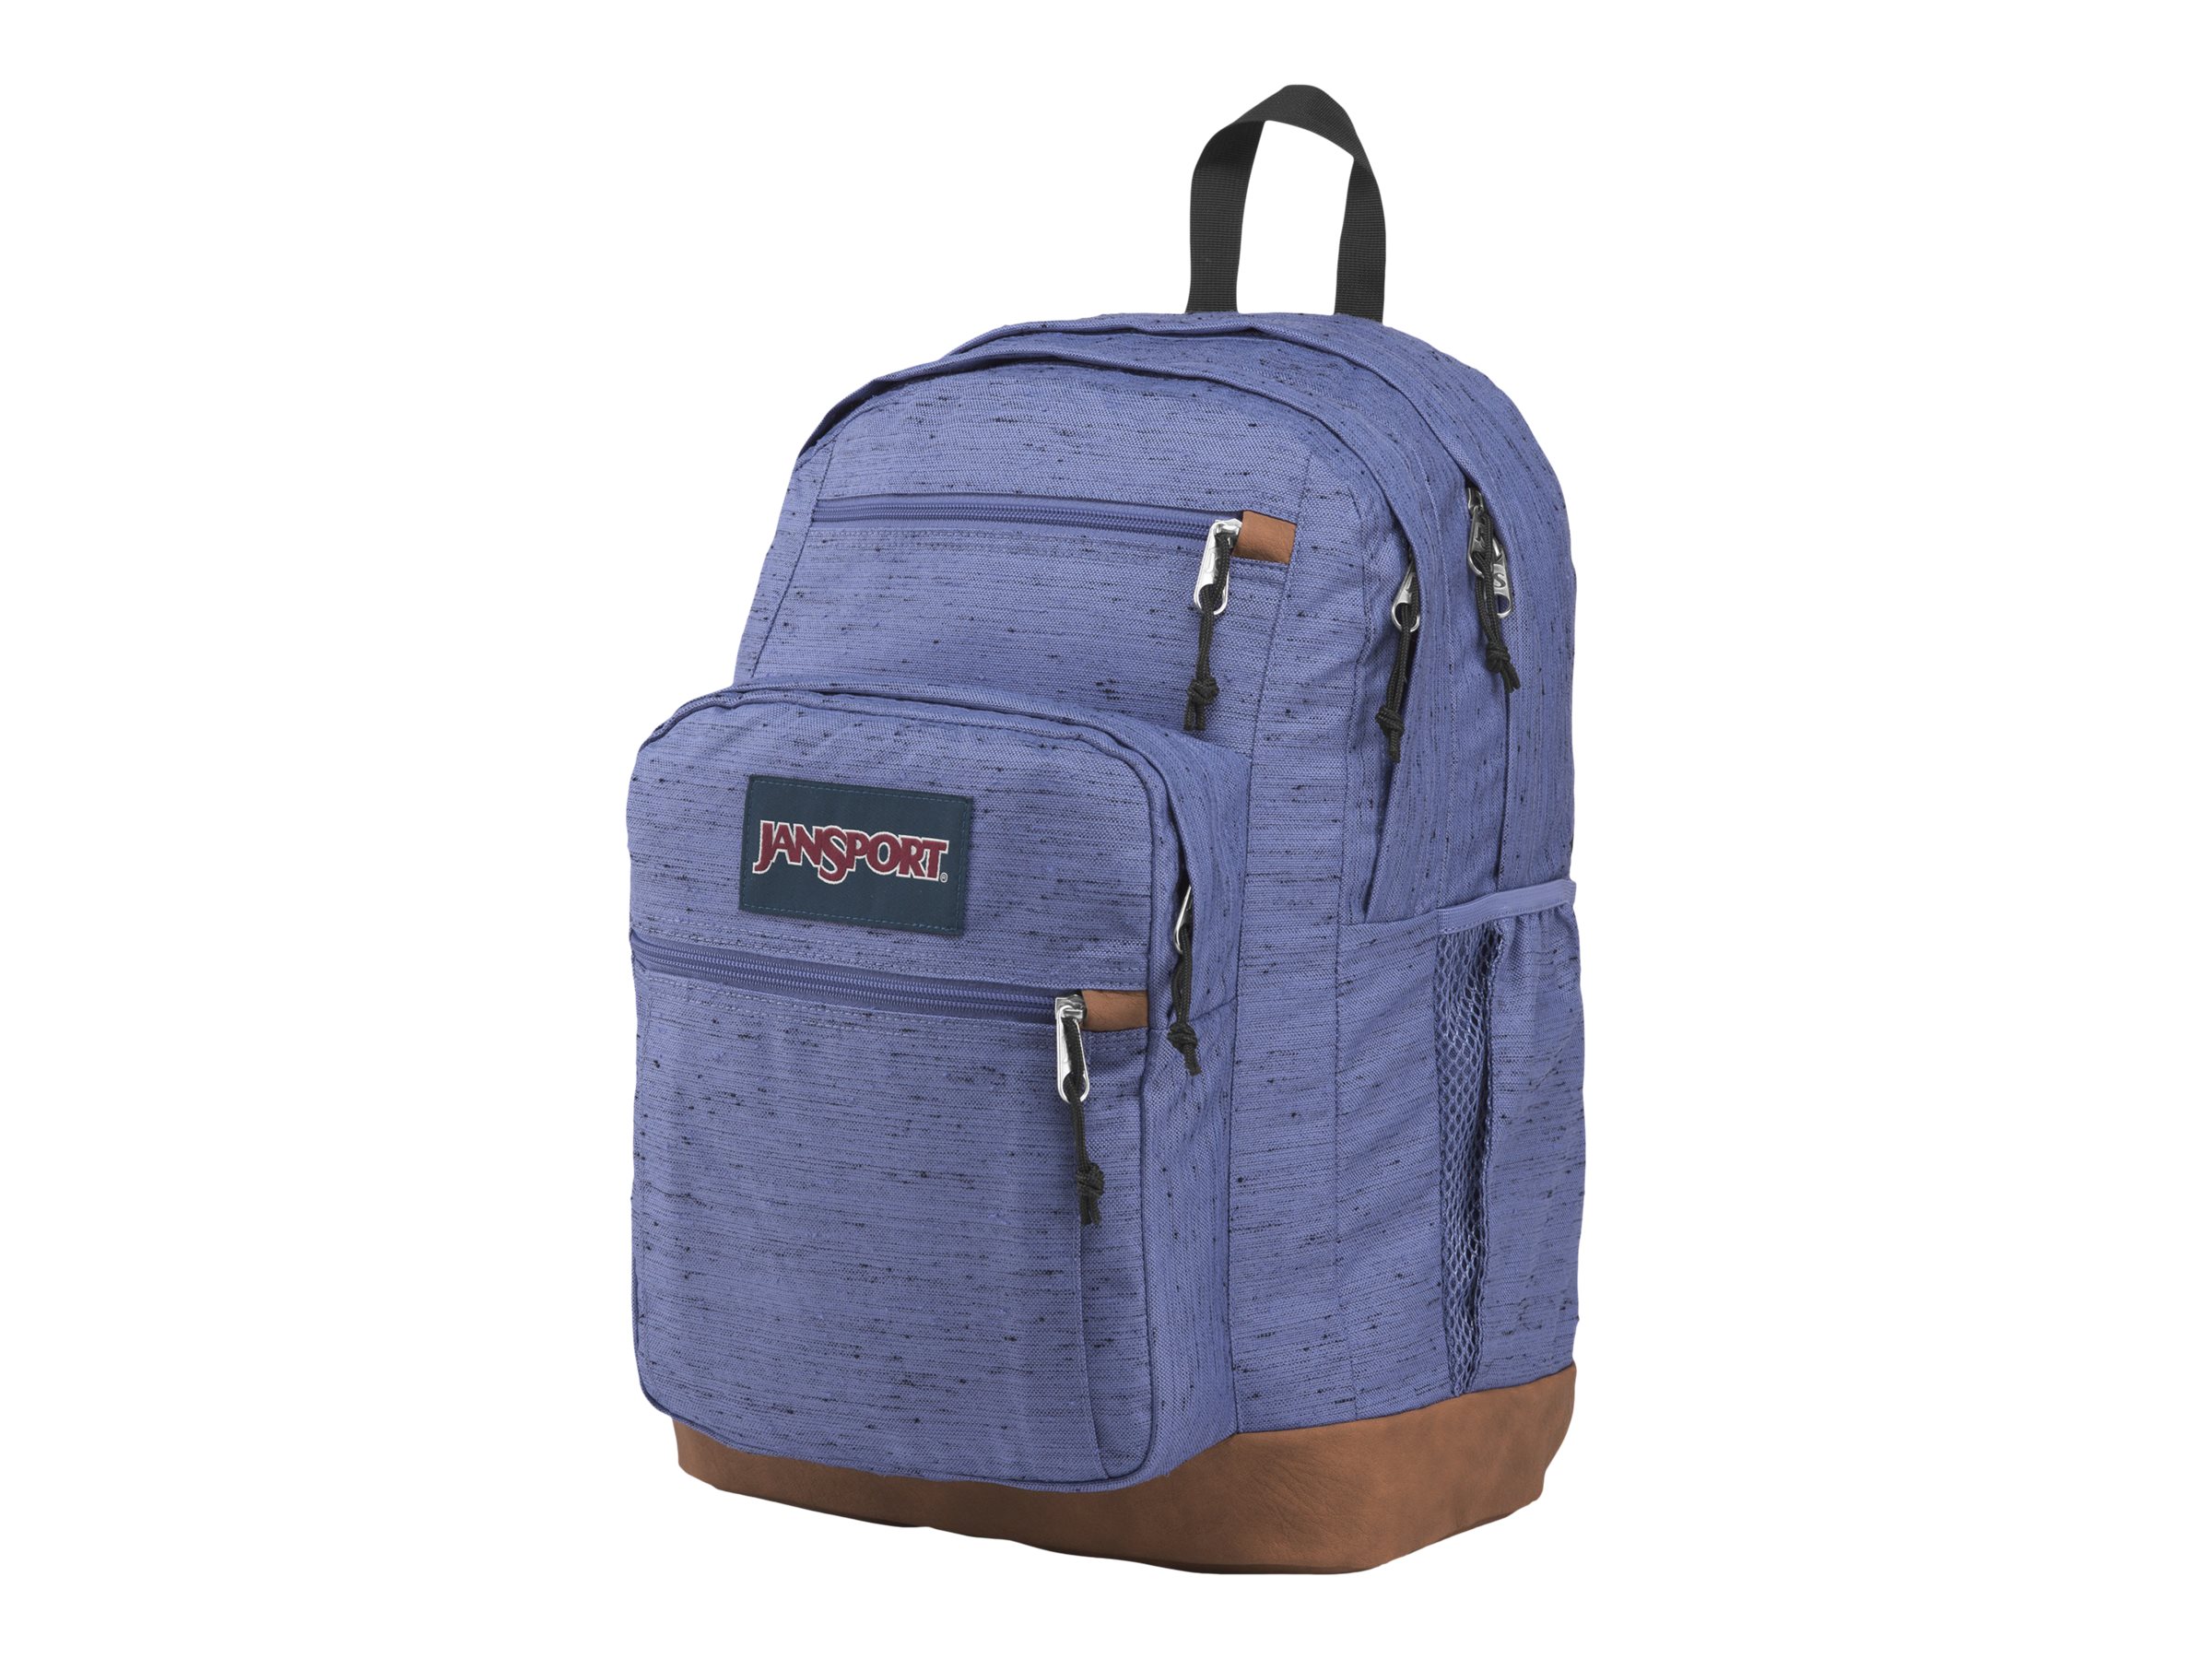 JanSport Cool Student - Notebook carrying backpack - 15" - image 1 of 4